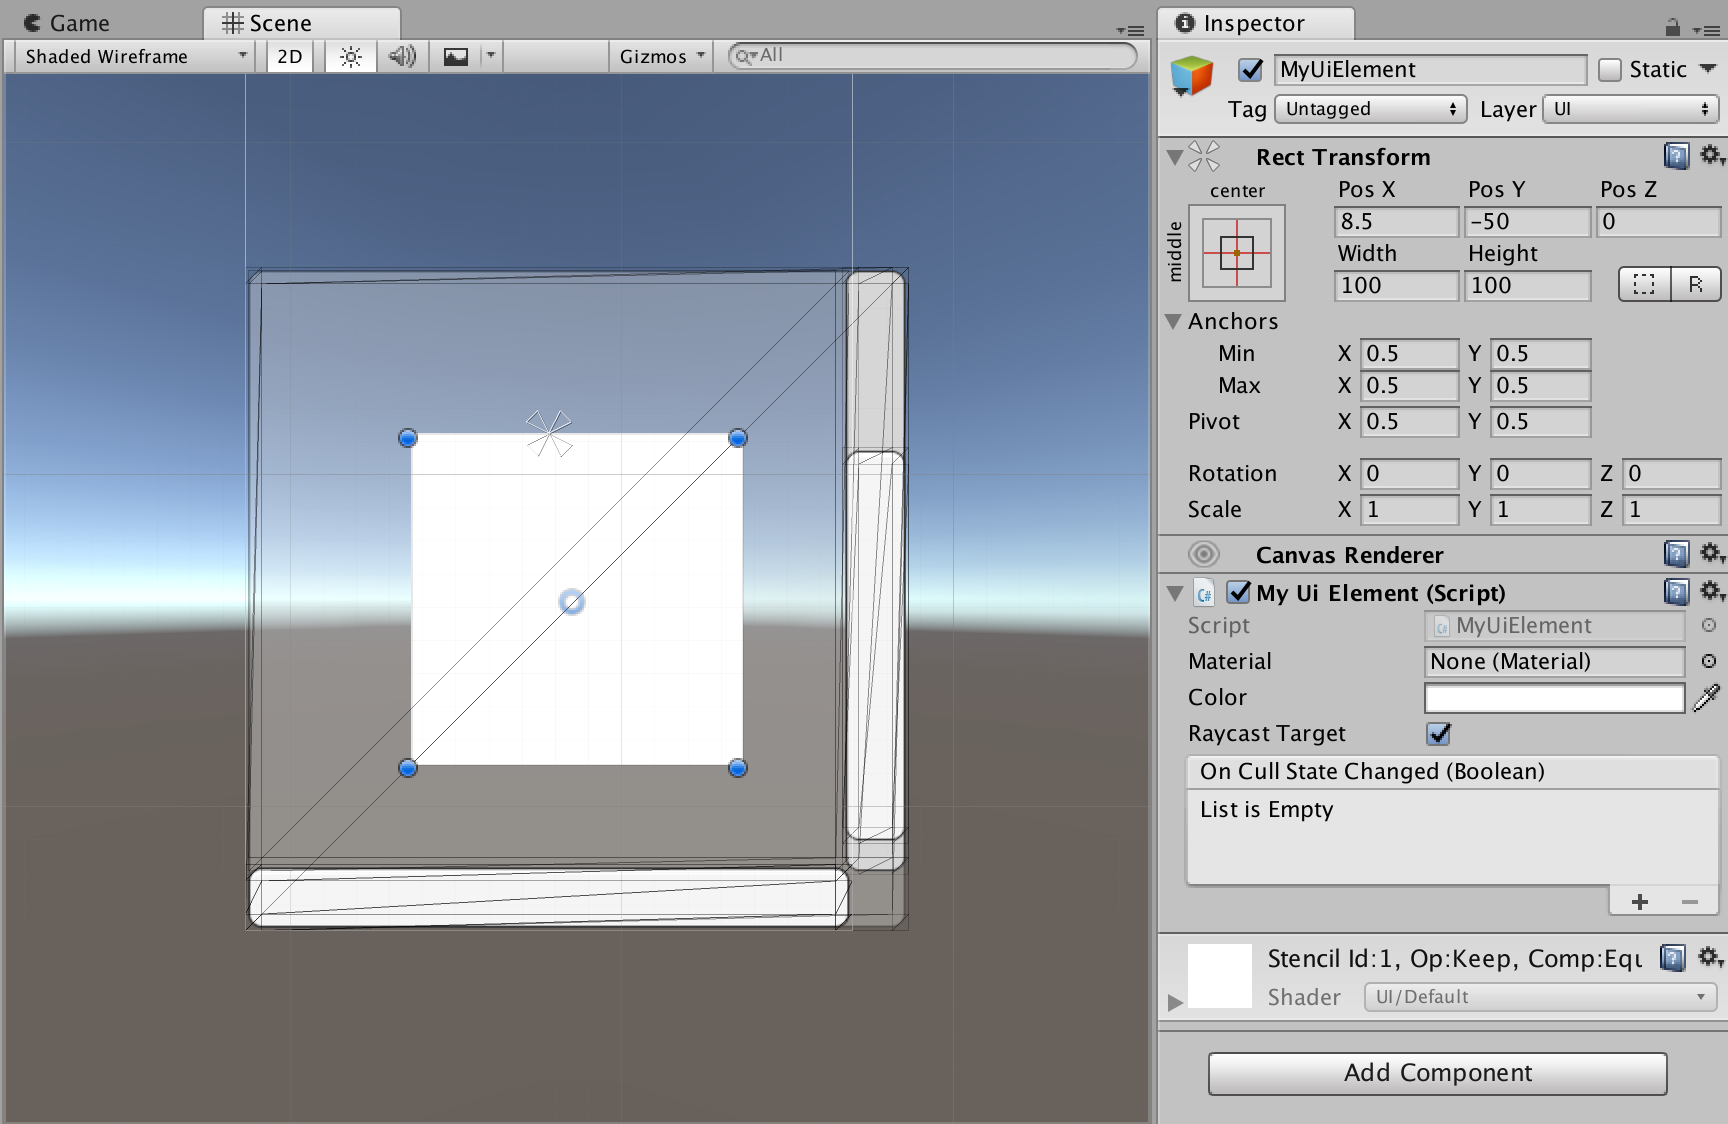 Scene view of our custom UI mesh object within a scroll rect, currently simply displaying a single white quad.